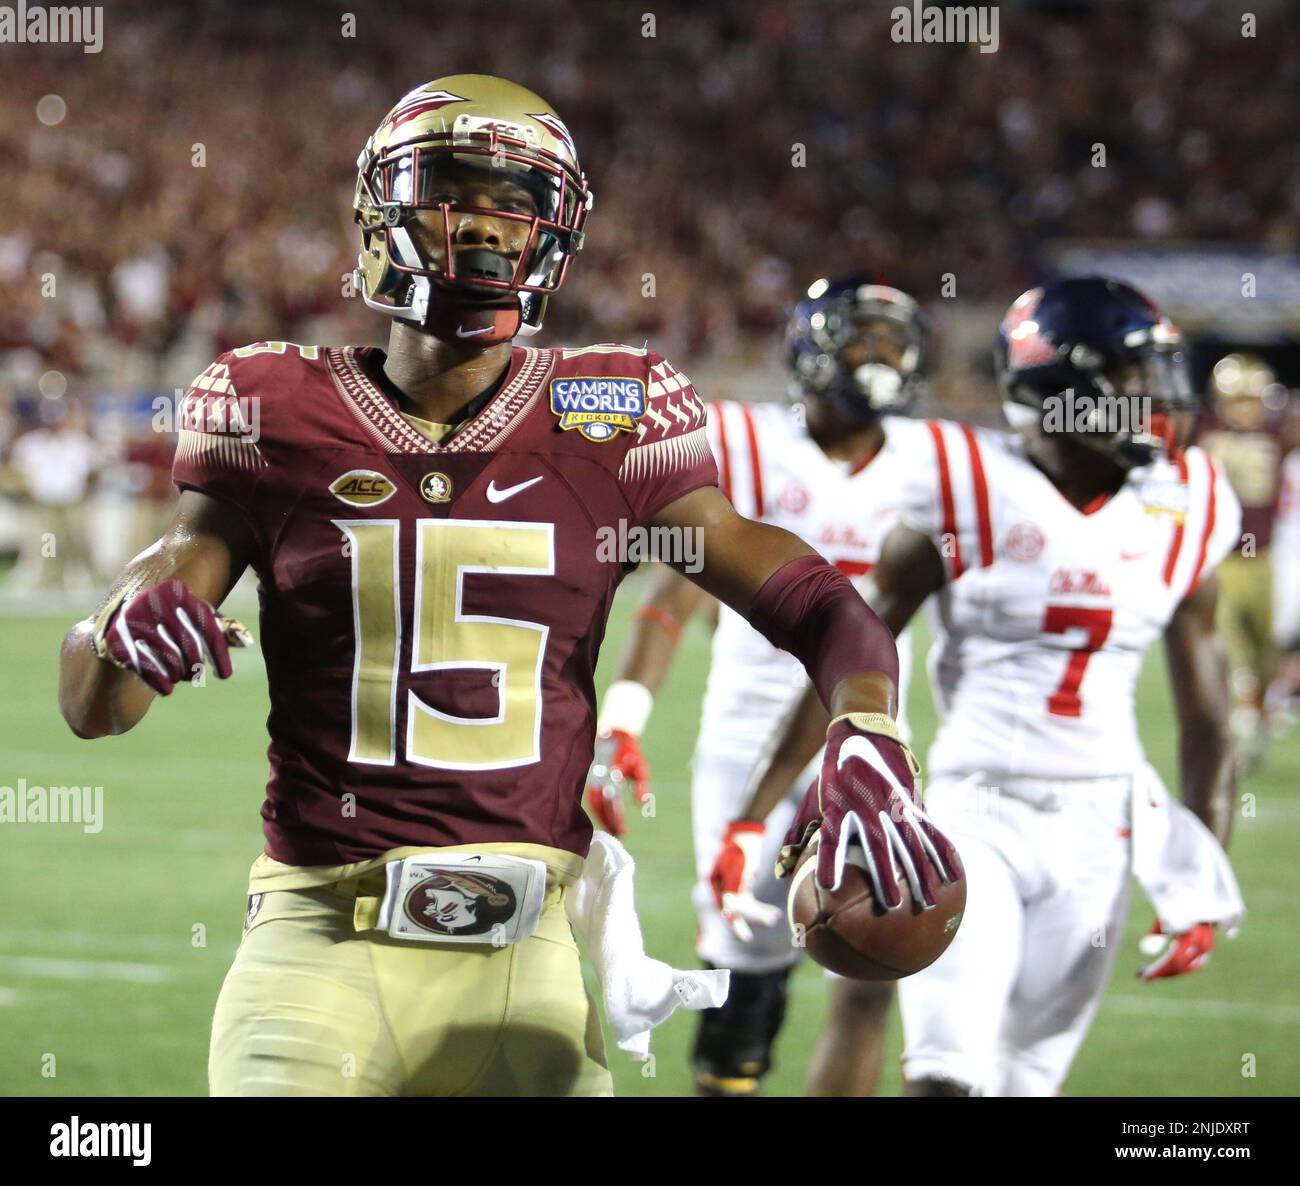 Orlando, USA. 05th Sep, 2016. In this 2016 file image, FSU's Travis Rudolph (#15) scores FSU's first touchdown during the Florida State vs. Ole Miss football game at Camping World Stadium in Orlando. (Photo by Stephen M. Dowell/Orlando Sentinel/TNS/Sipa USA) Credit: Sipa USA/Alamy Live News Stock Photo